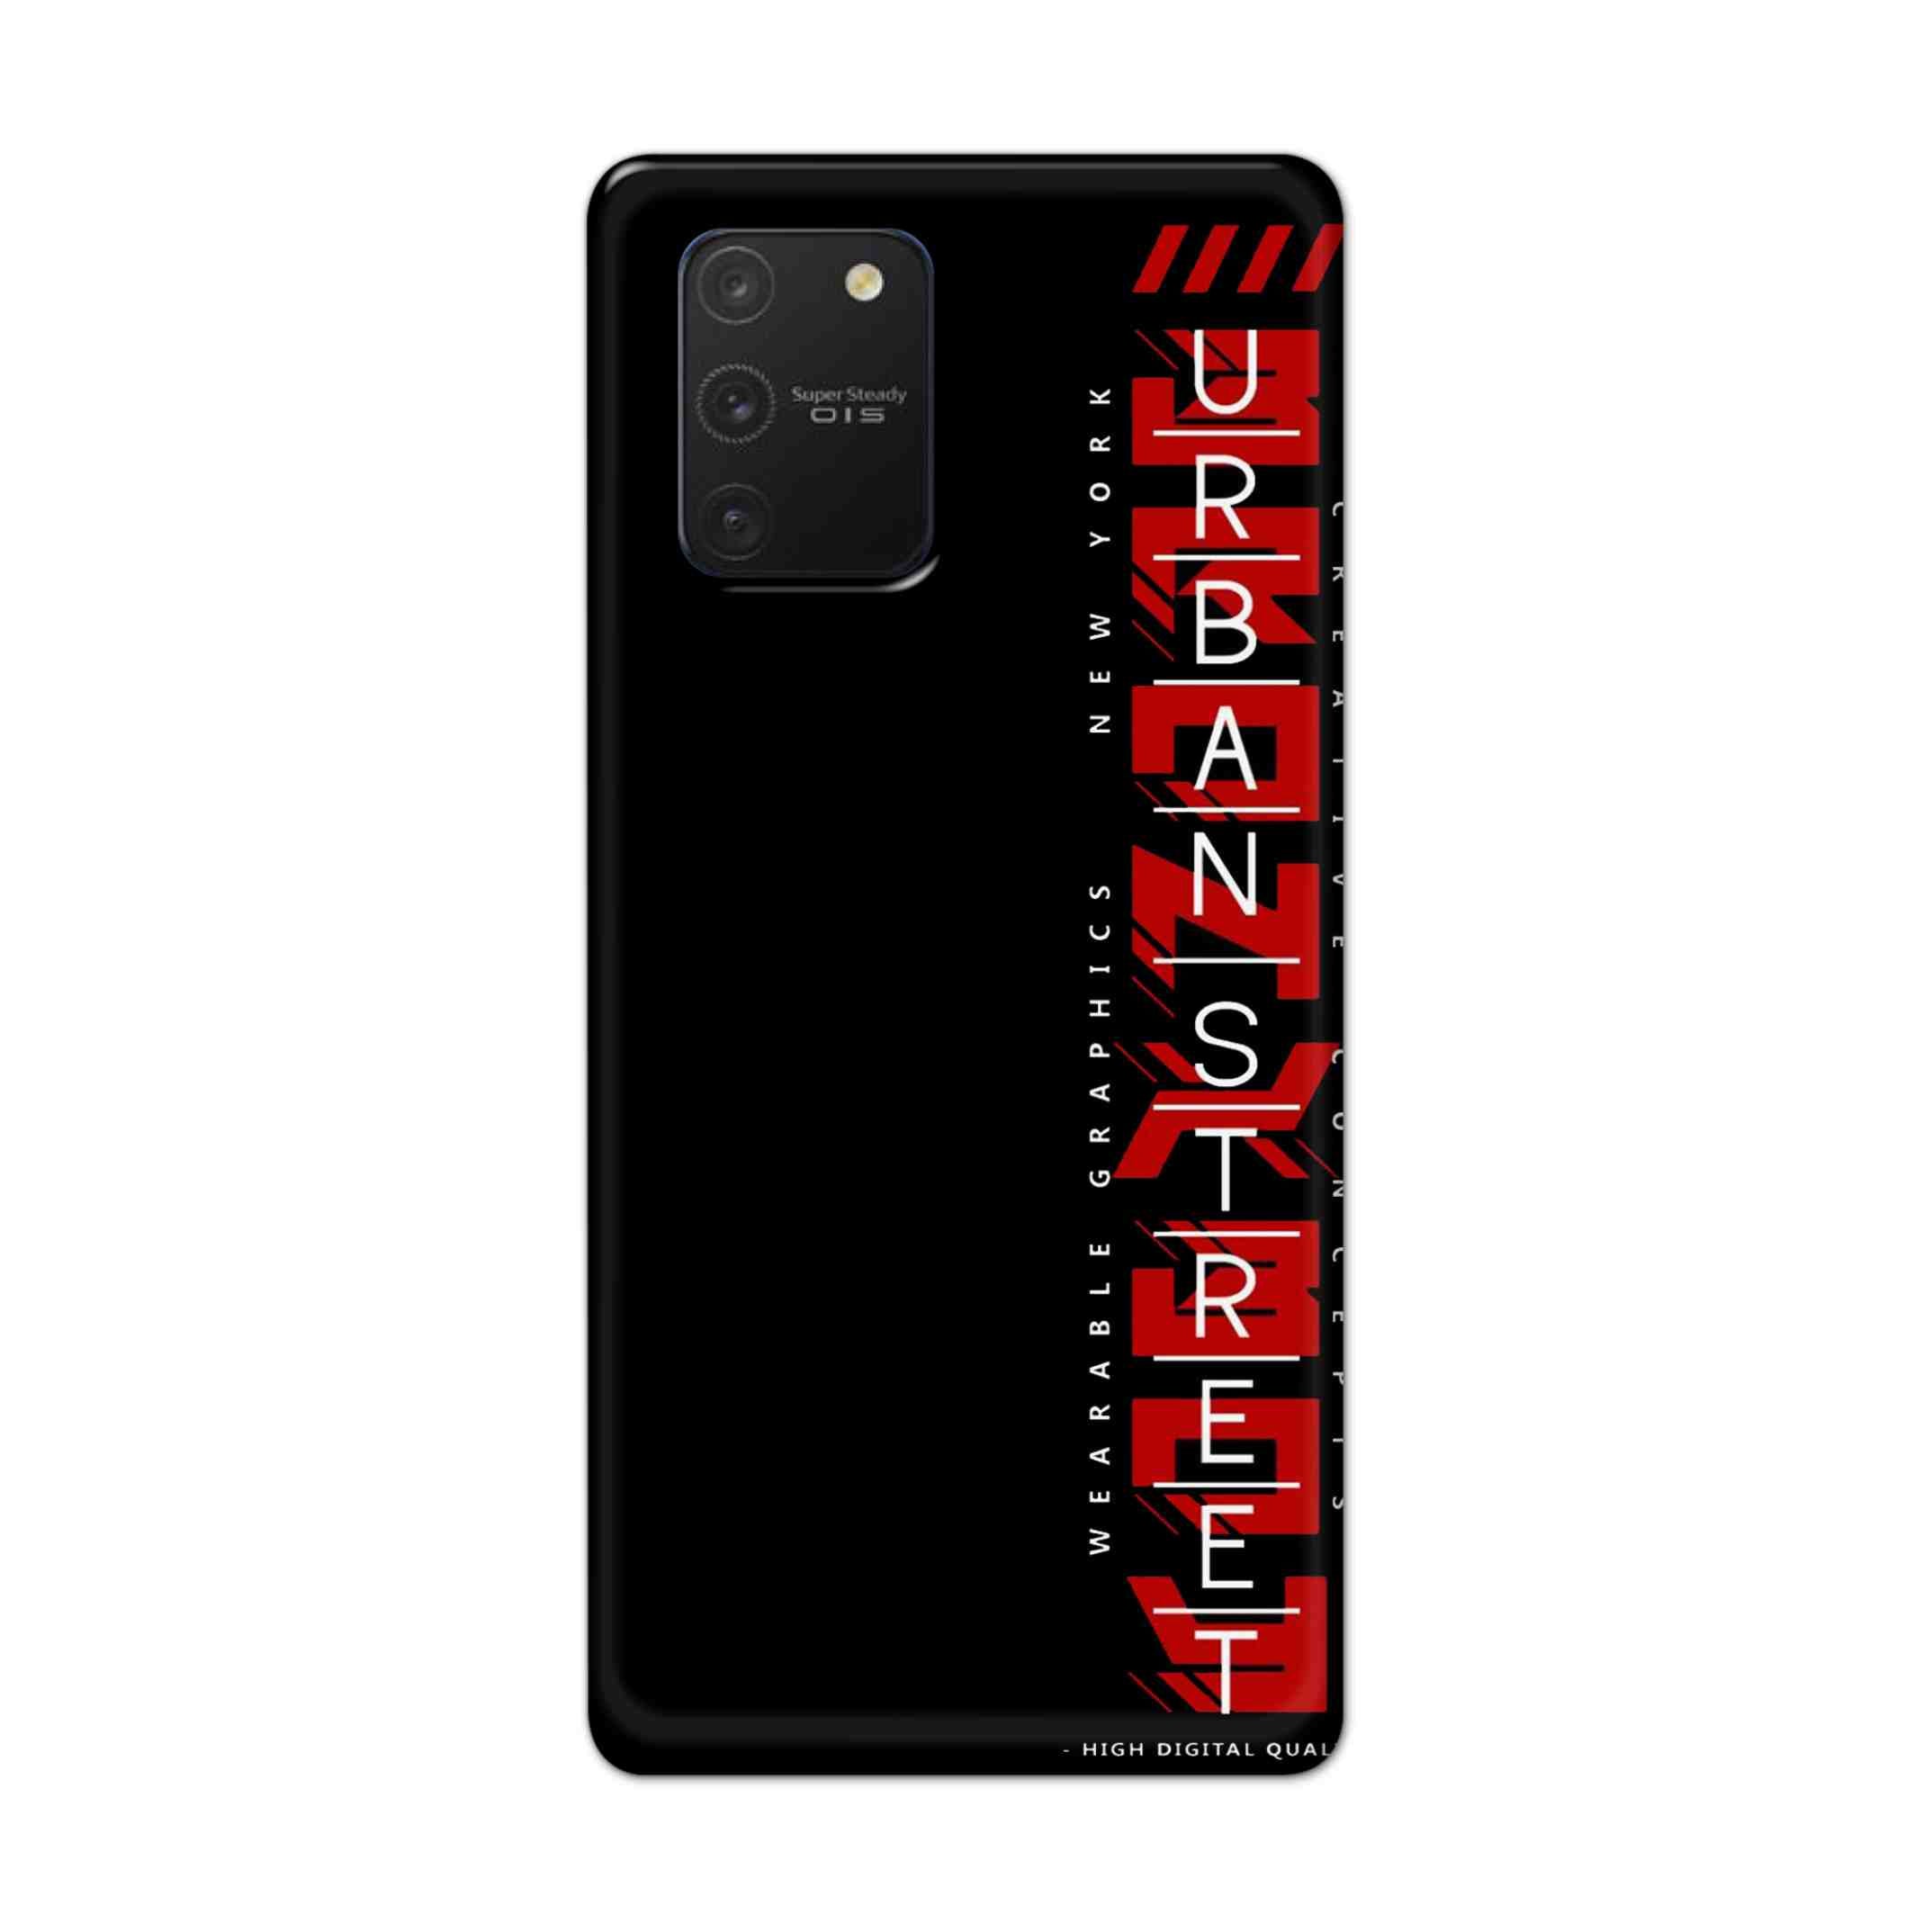 Buy Urban Street Hard Back Mobile Phone Case Cover For Samsung Galaxy S10 Lite Online